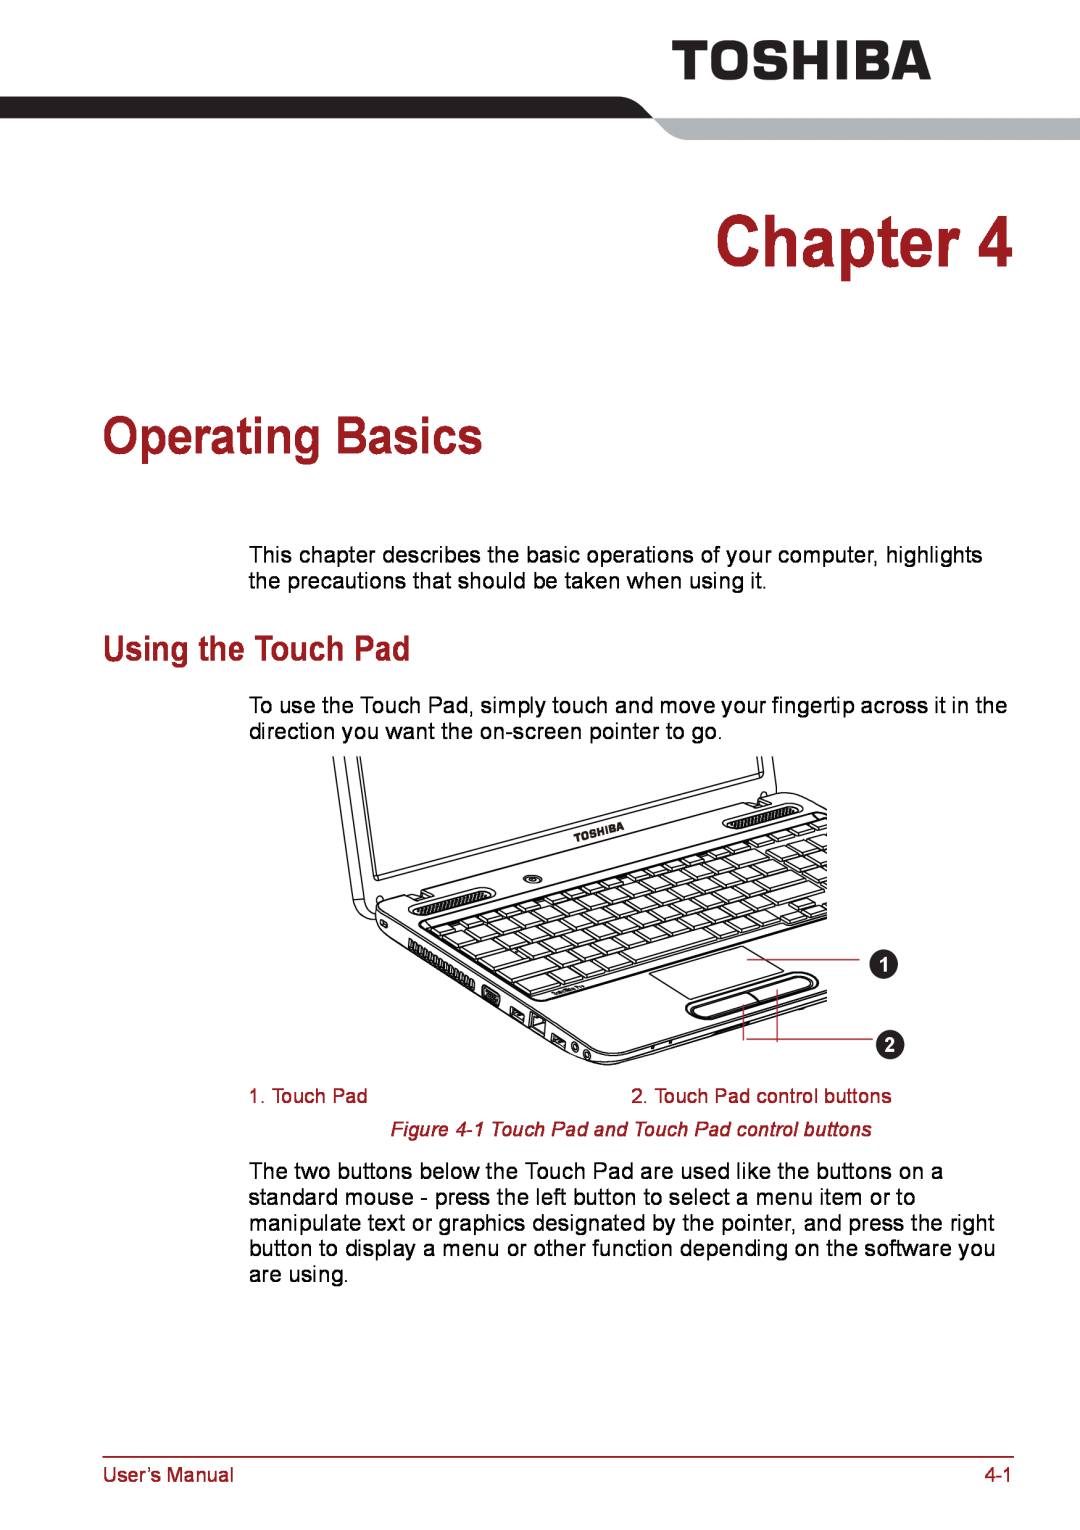 Toshiba PSC08U-02D01D user manual Operating Basics, Using the Touch Pad, Chapter 